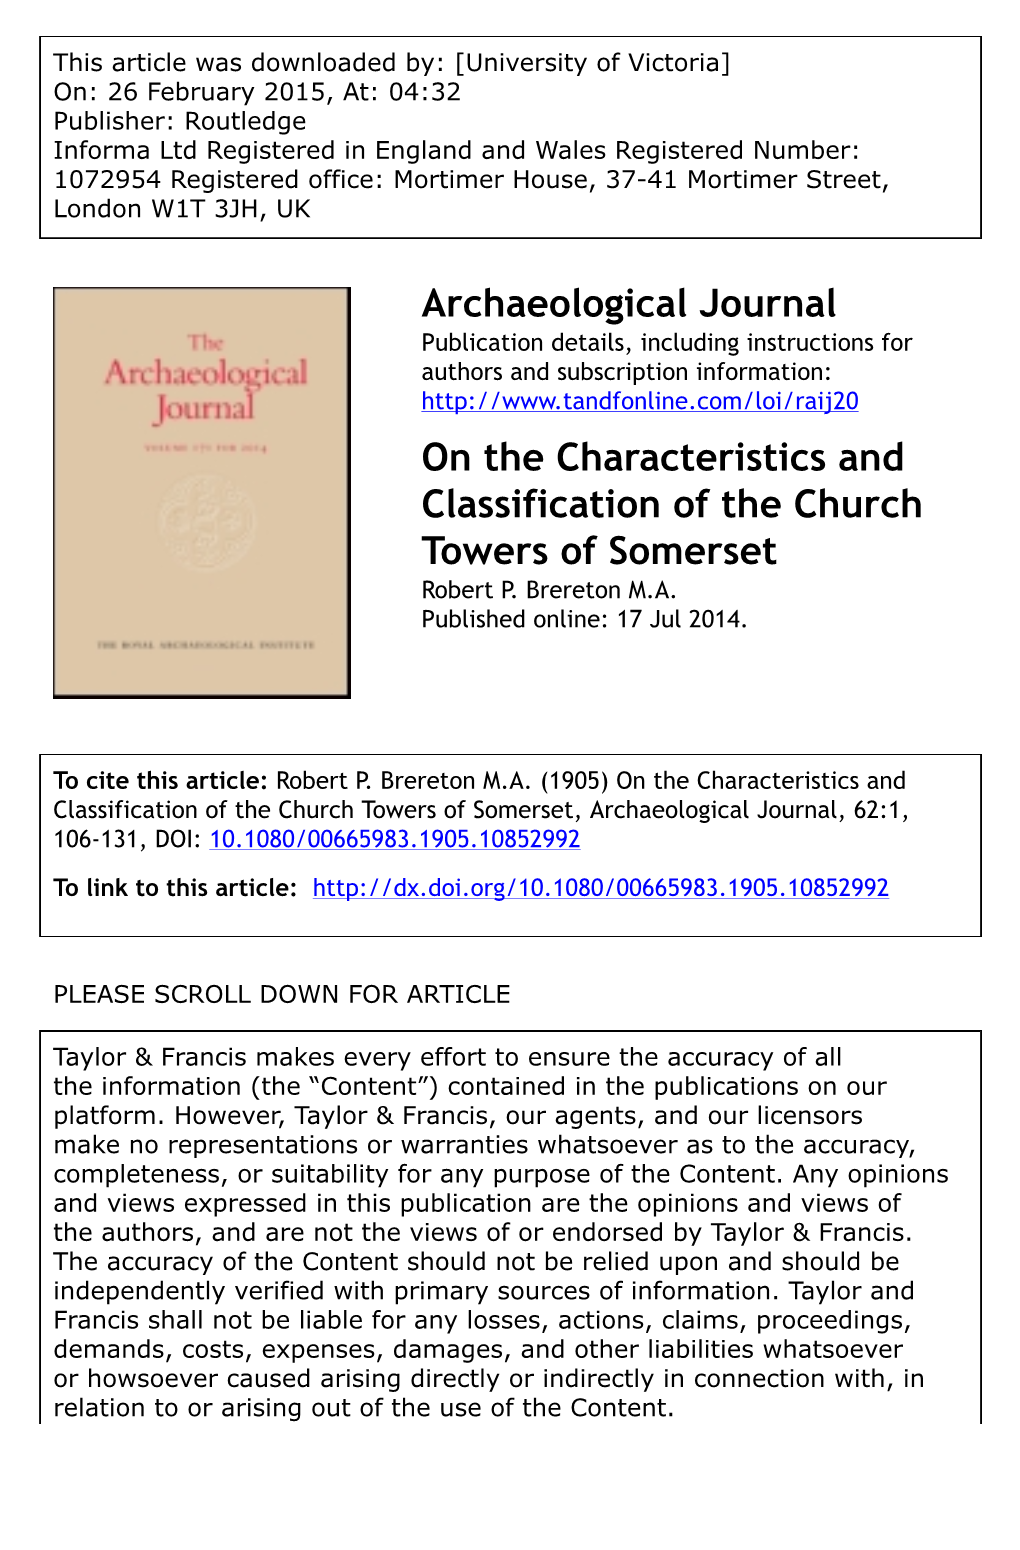 Archaeological Journal on the Characteristics and Classification Of